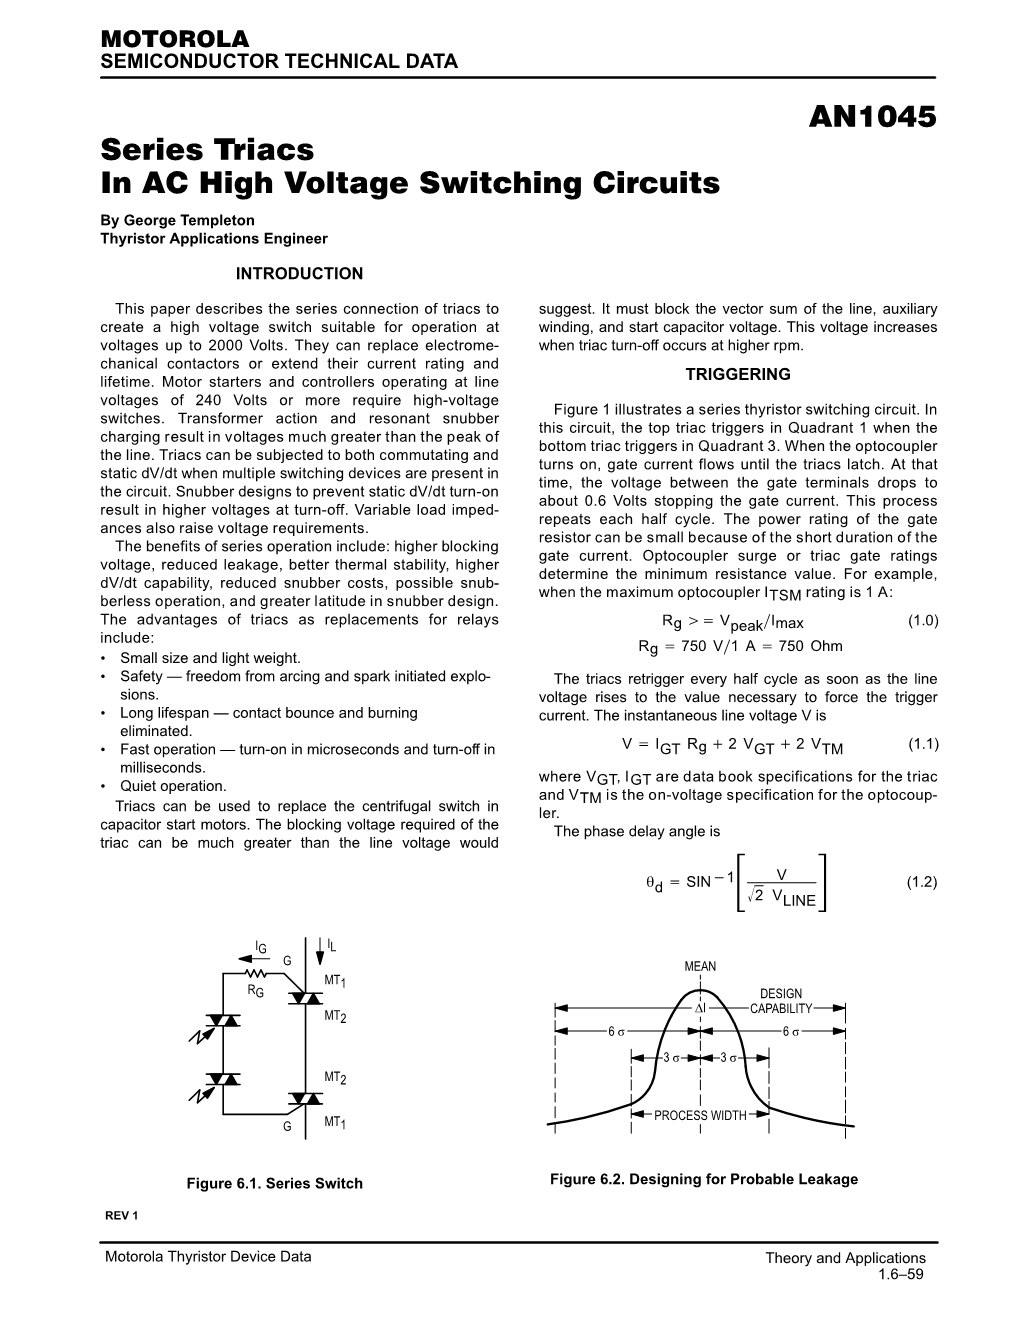 AN1045 Series Triacs in AC High Voltage Switching Circuits